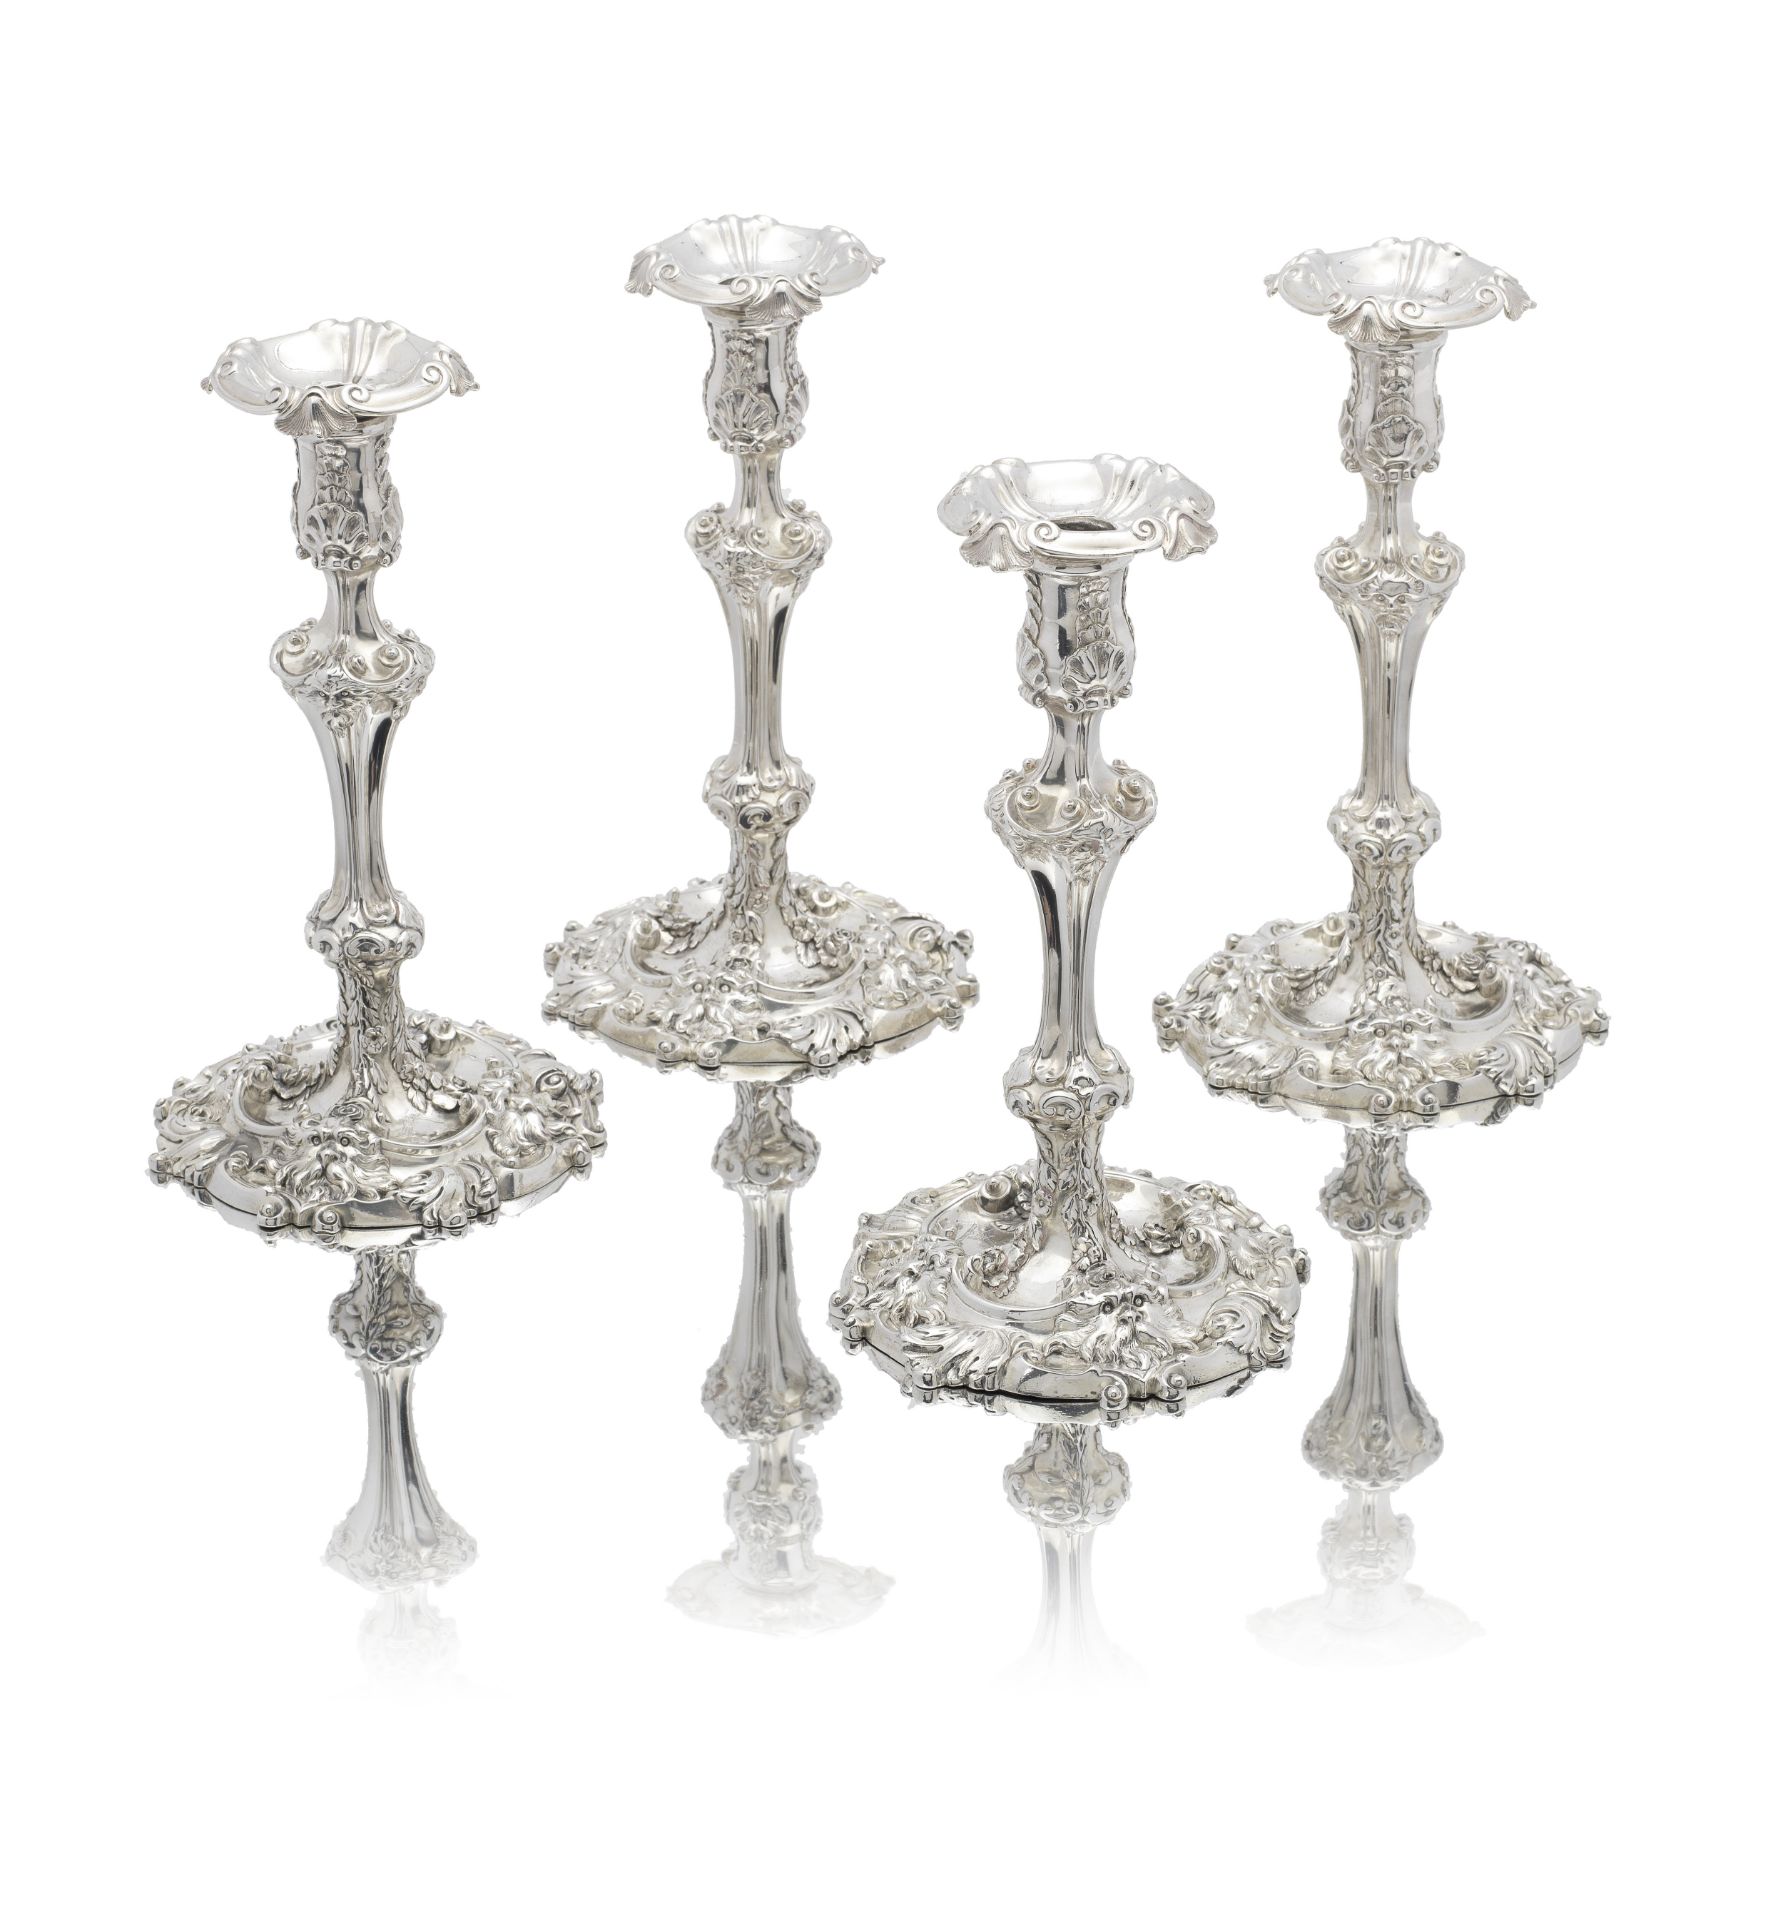 A set of four George III silver candlesticks Paul Storr, London 1815 (4)